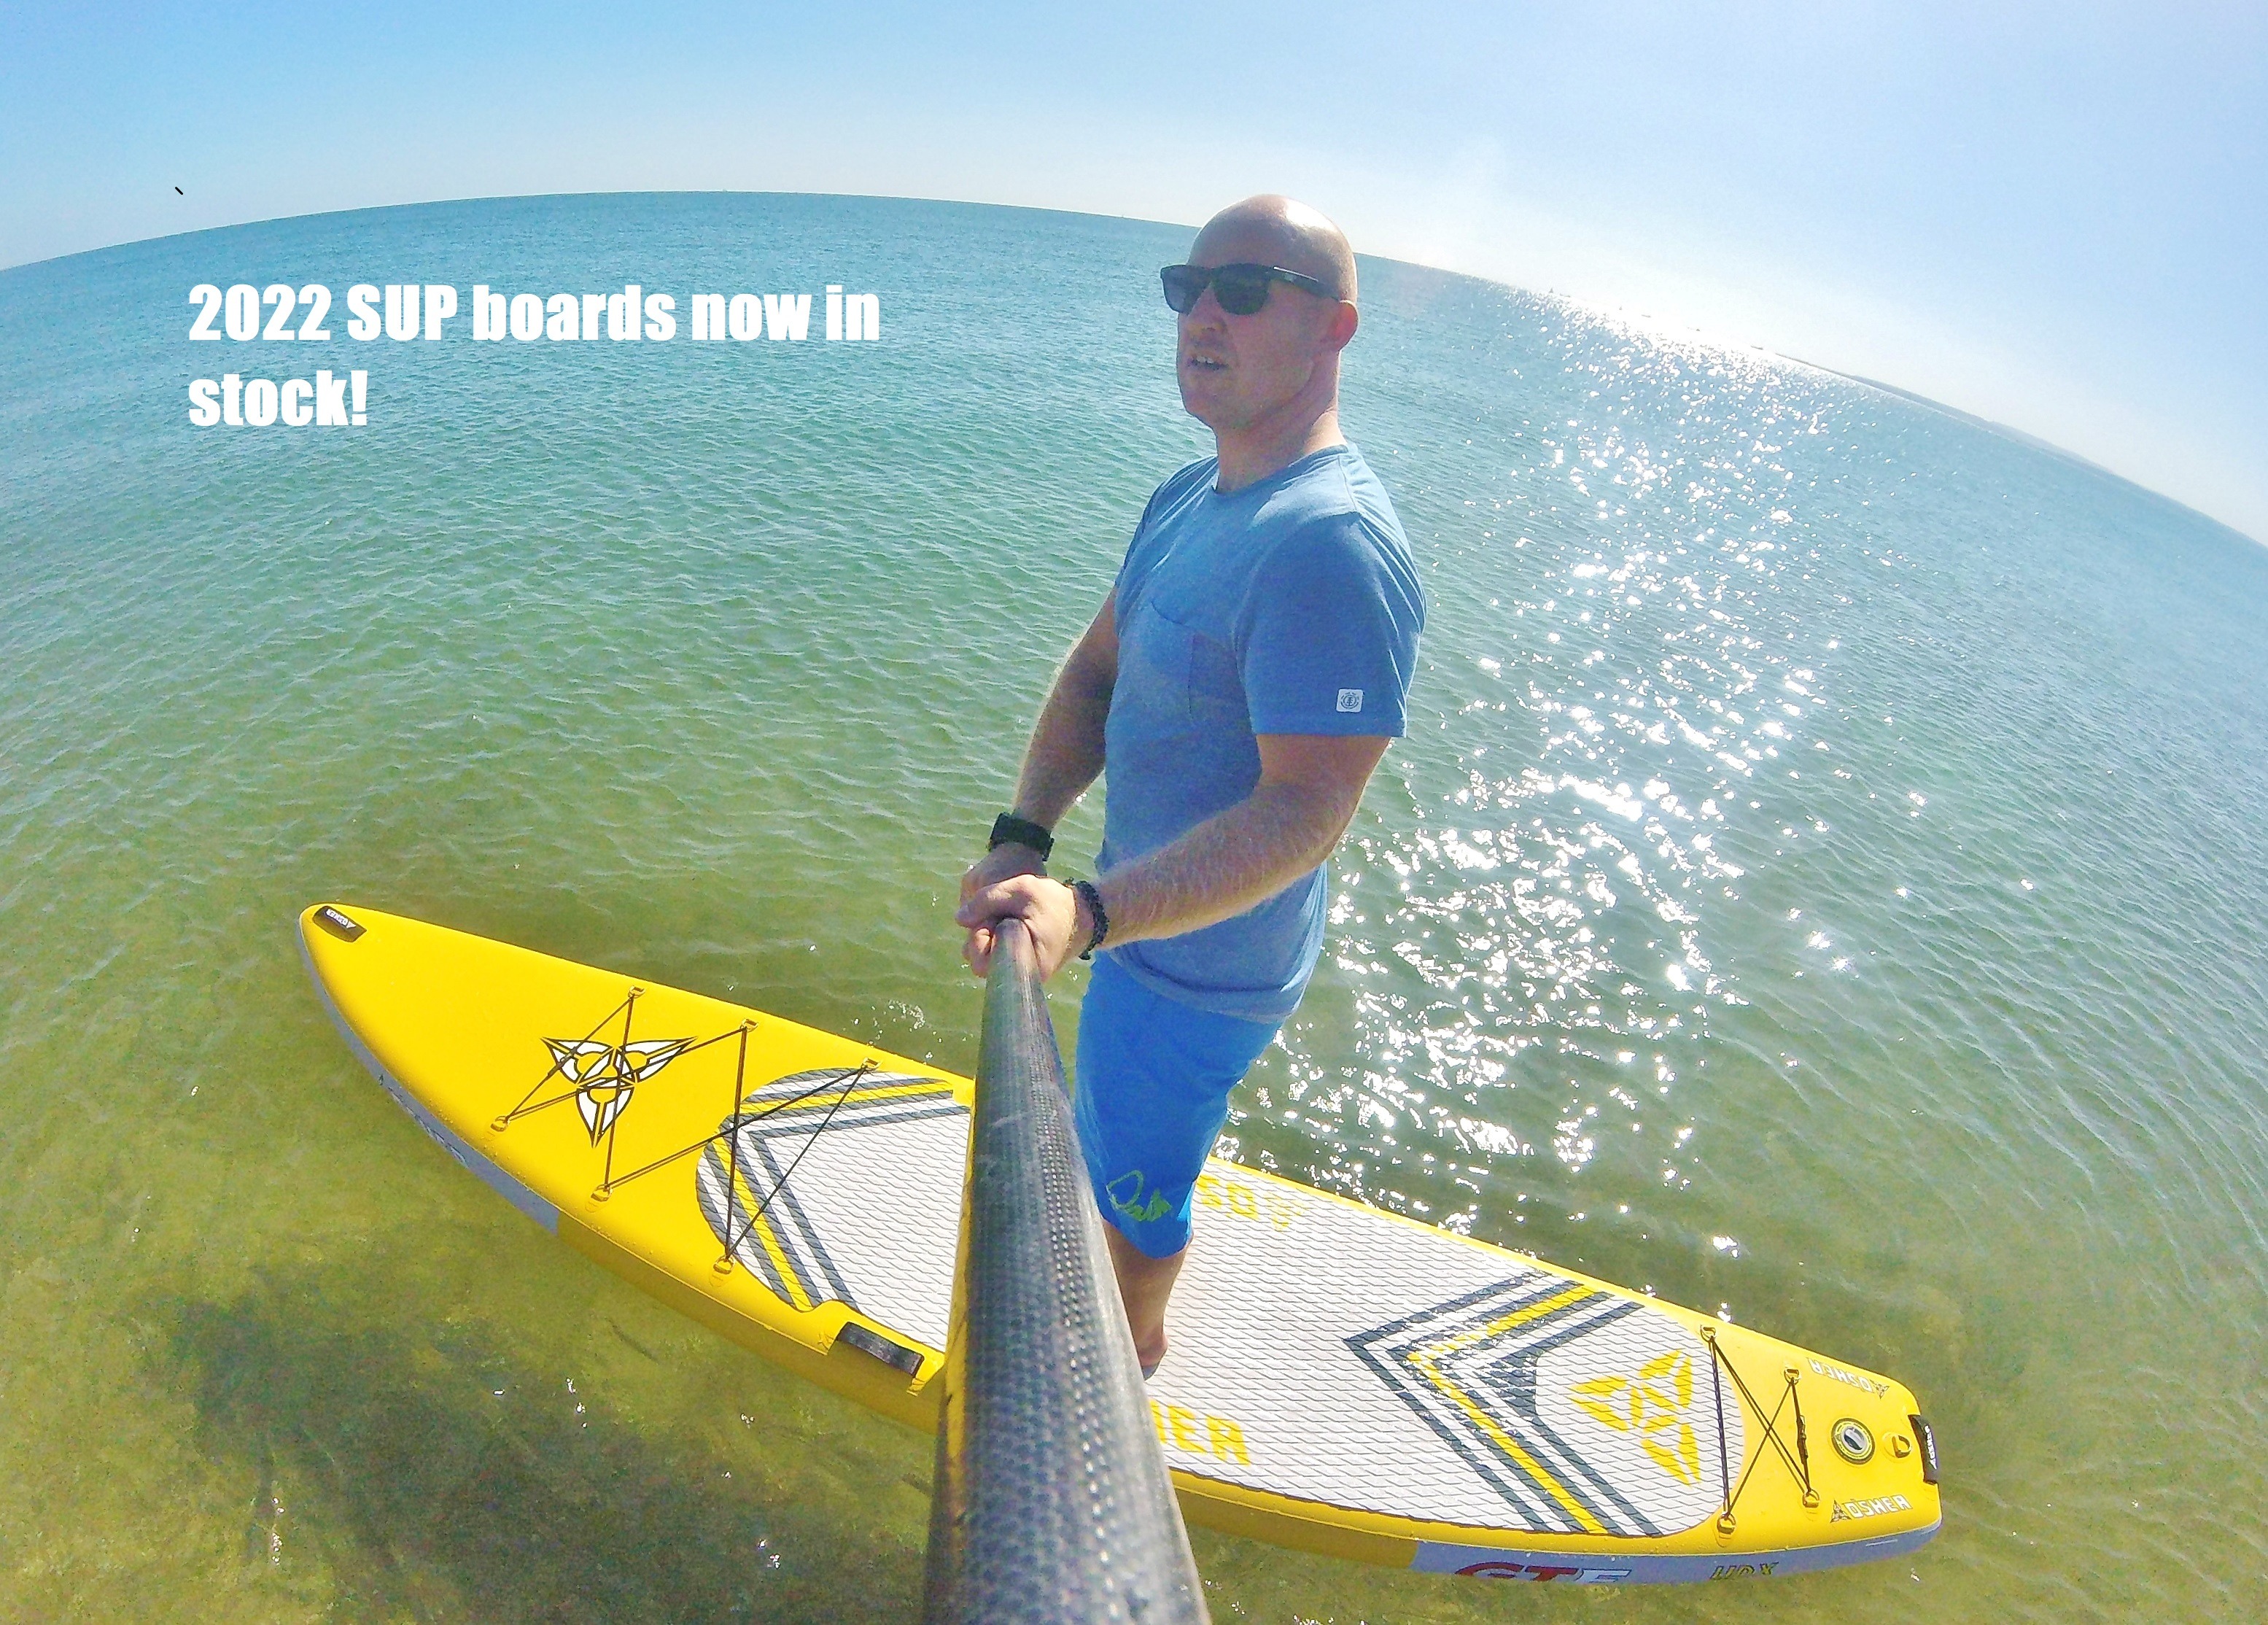 2022 SUP boards now in stock!